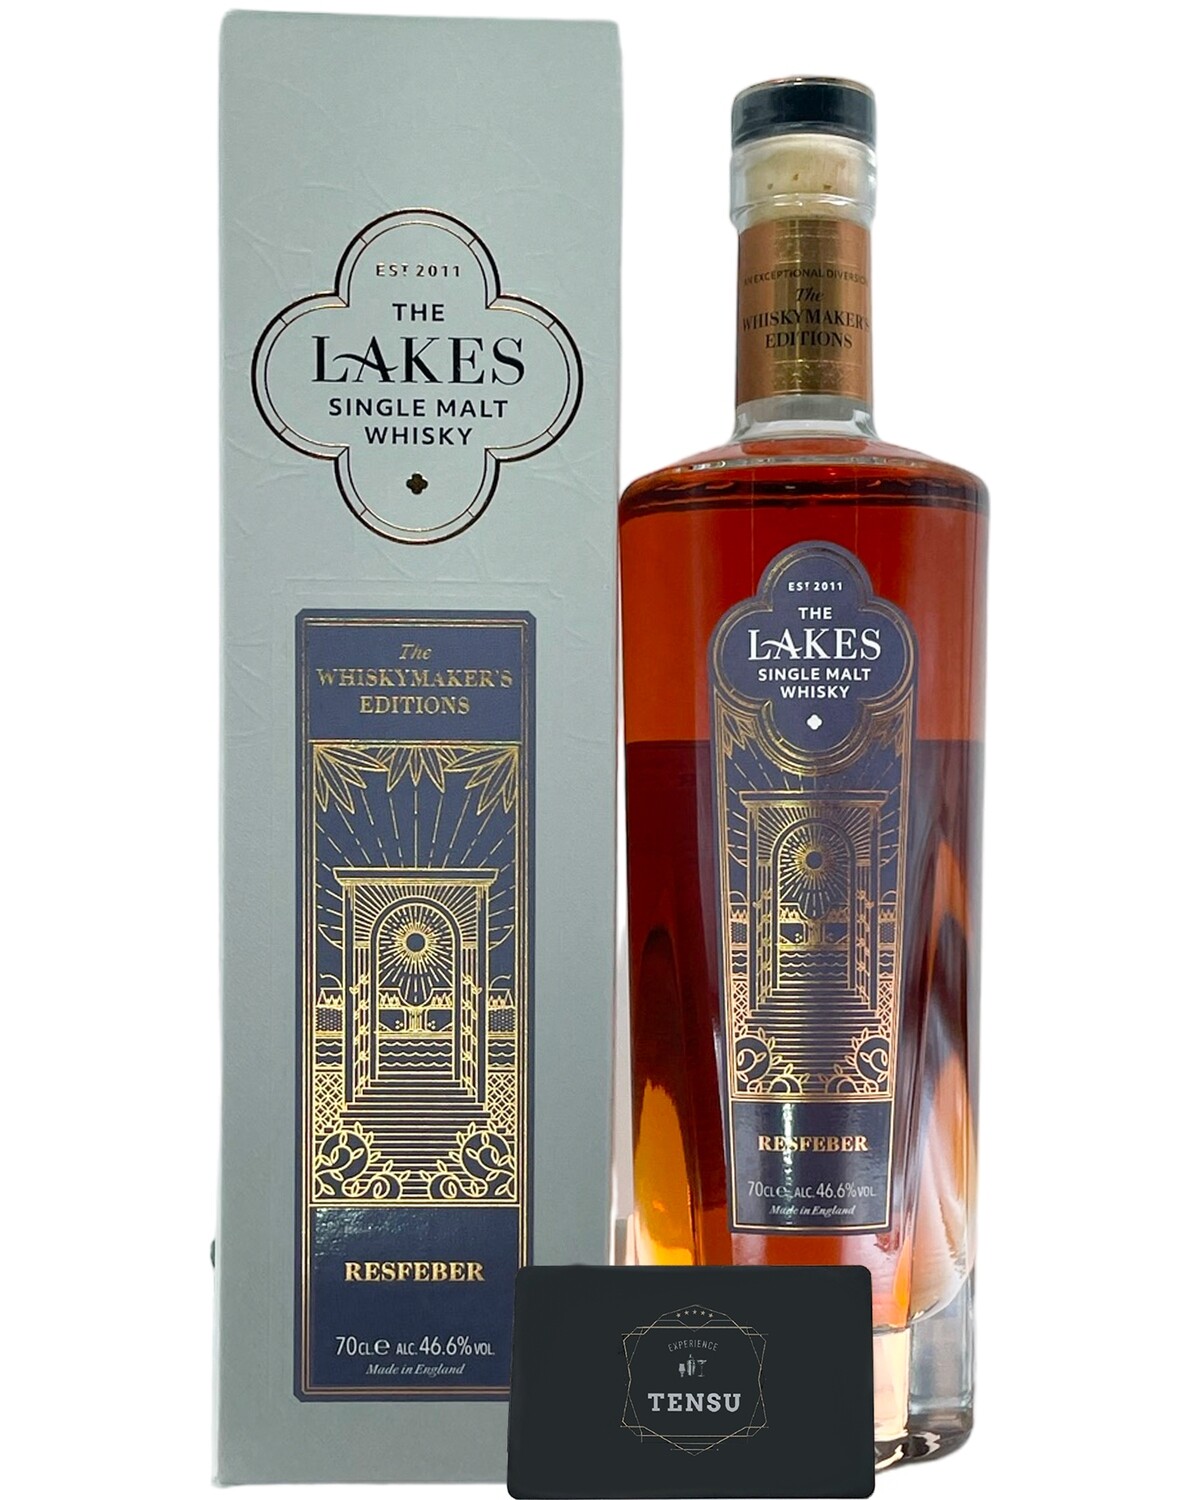 The Lakes - The Whiskymaker's Editions - Resfeber 46.6 "The Lakes Distillery"